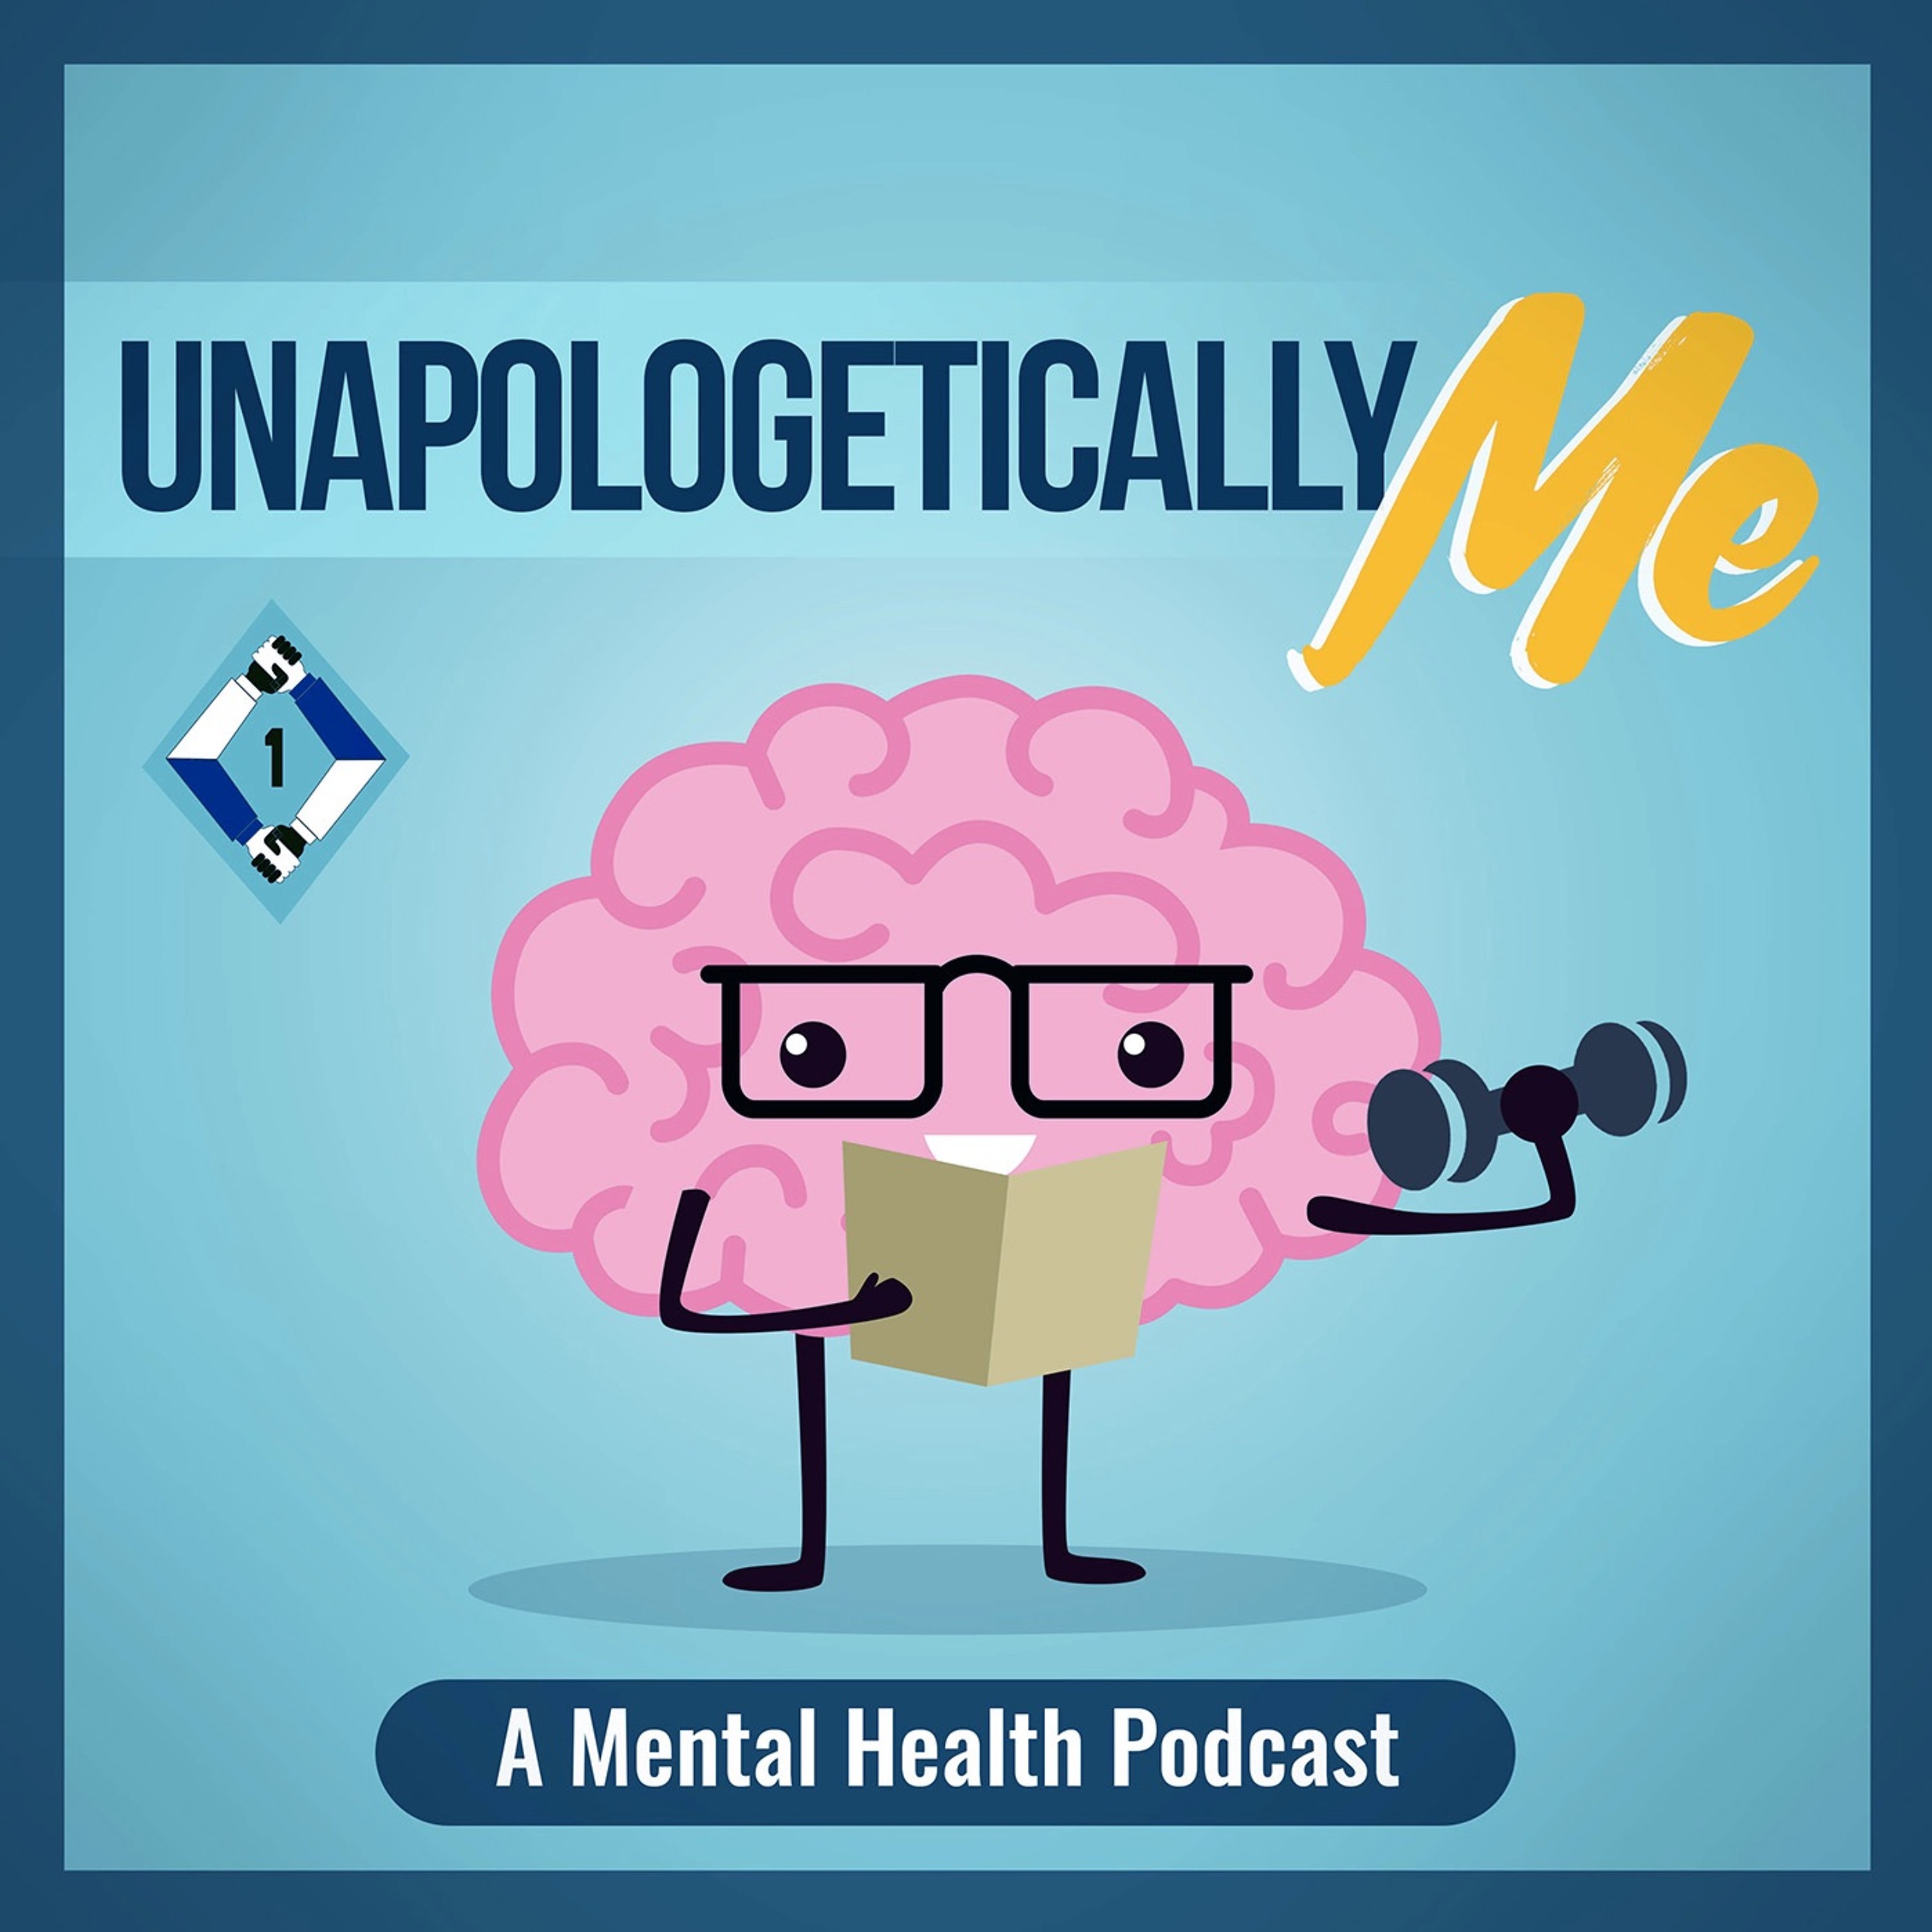 Unapologetically Me: A Mental Health Podcast - Tap Your Way To Living Pain Free